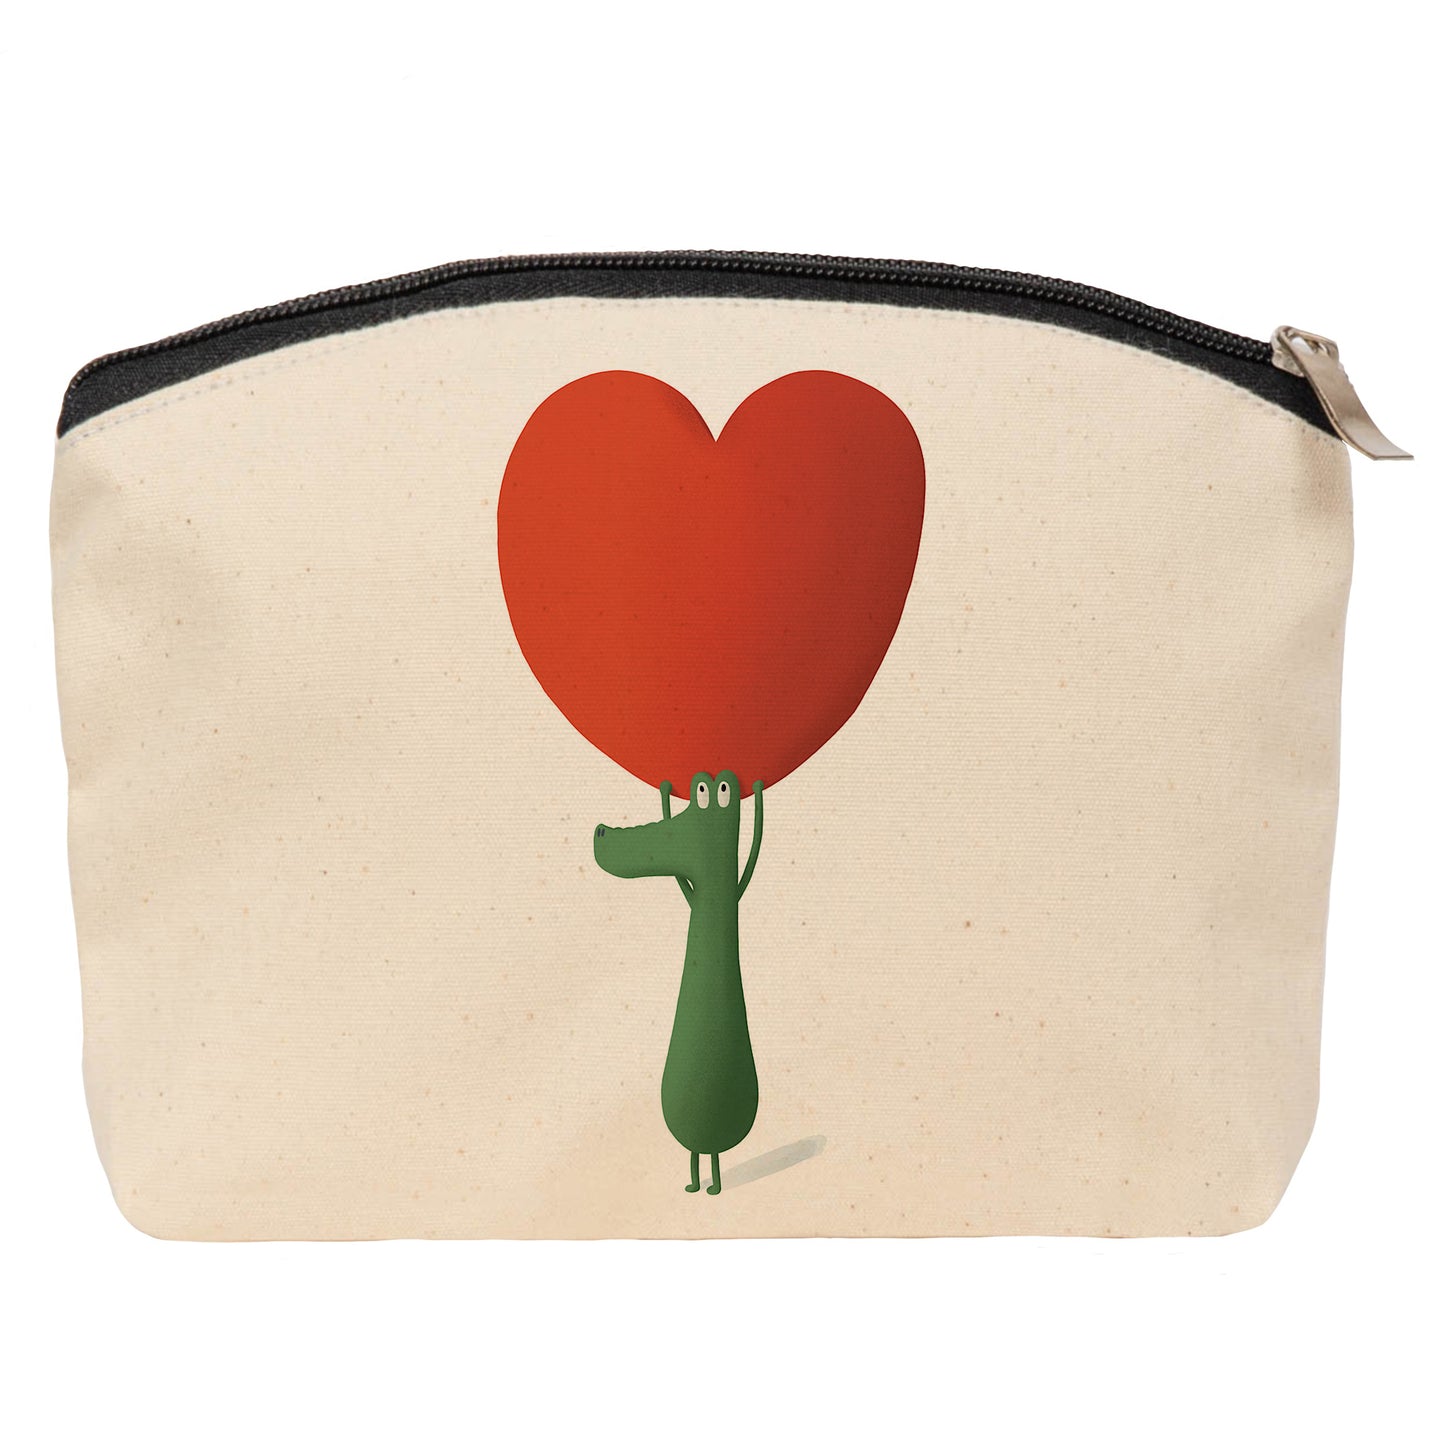 Frank with heart cosmetic bag